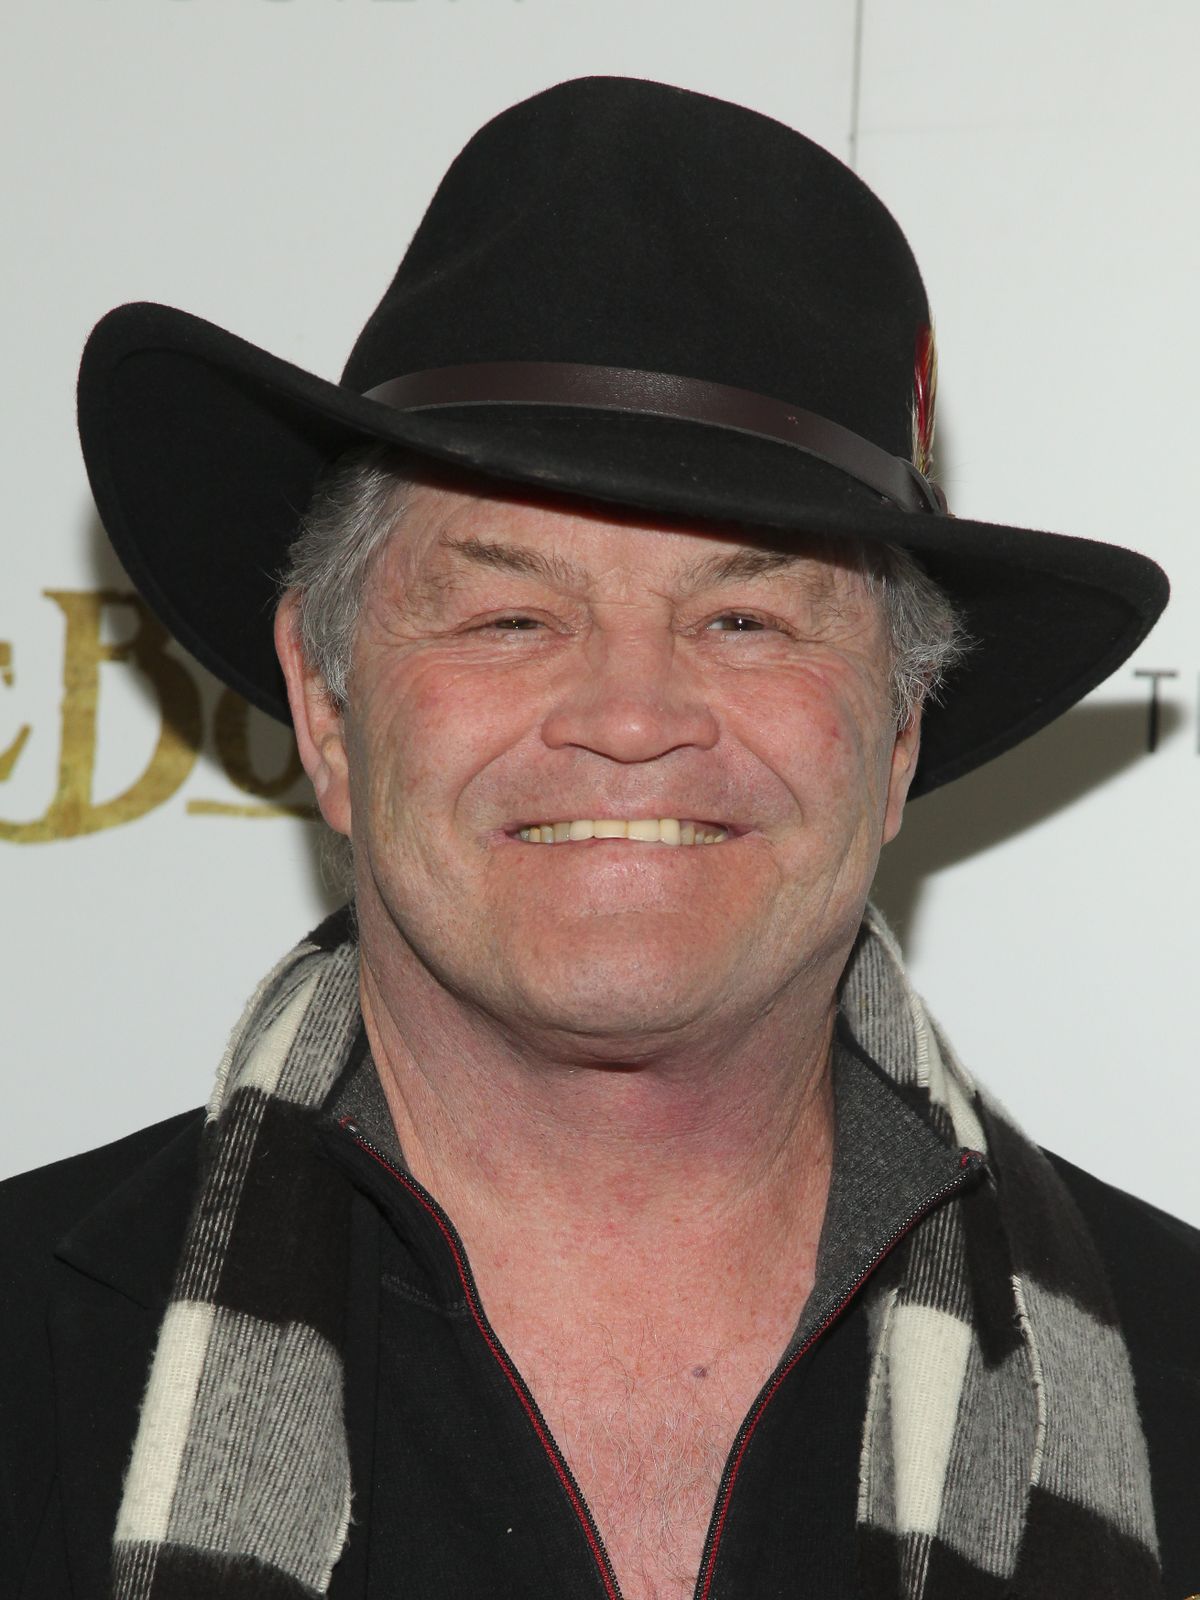 Micky Dolenz attends a screening of “The Jungle Book” hosted by Disney and the Cinema Society at AMC Empire 25 on April 7, 2016, in New York.  (Andy Kropa/Invision/AP)